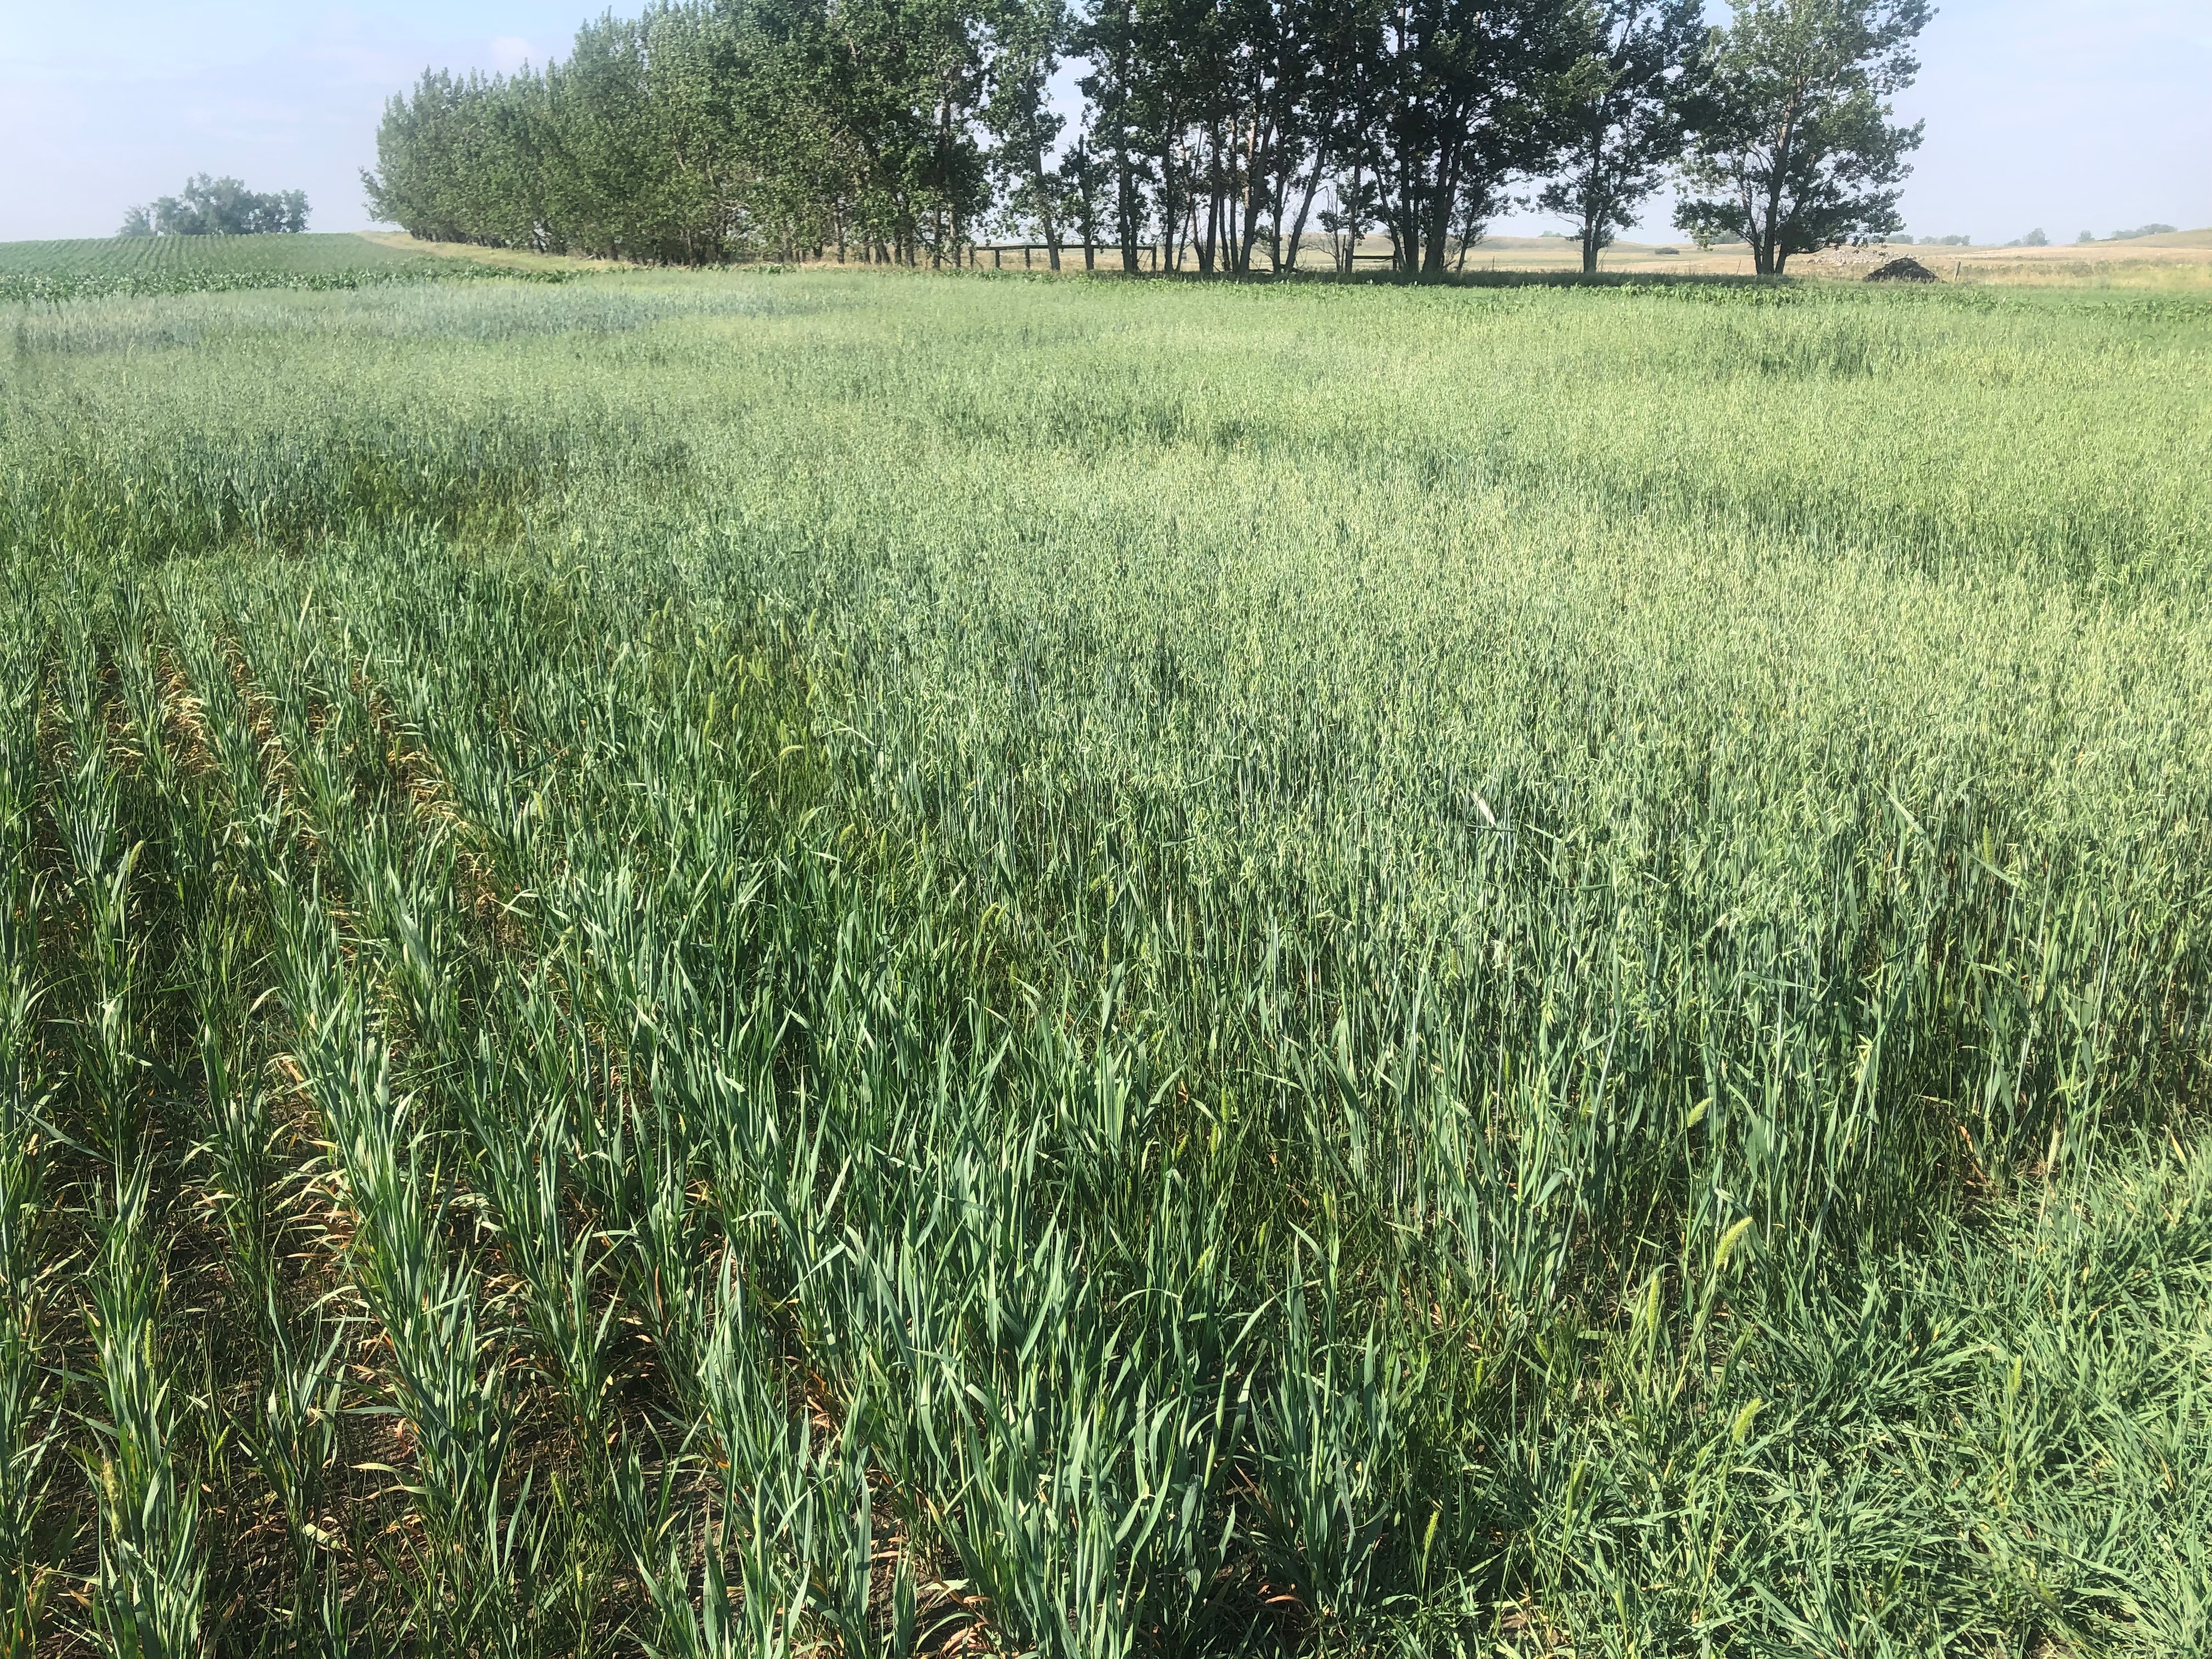 Diversifying annual forage crops reduces risk and increases resilience in forage systems. (NDSU photo)